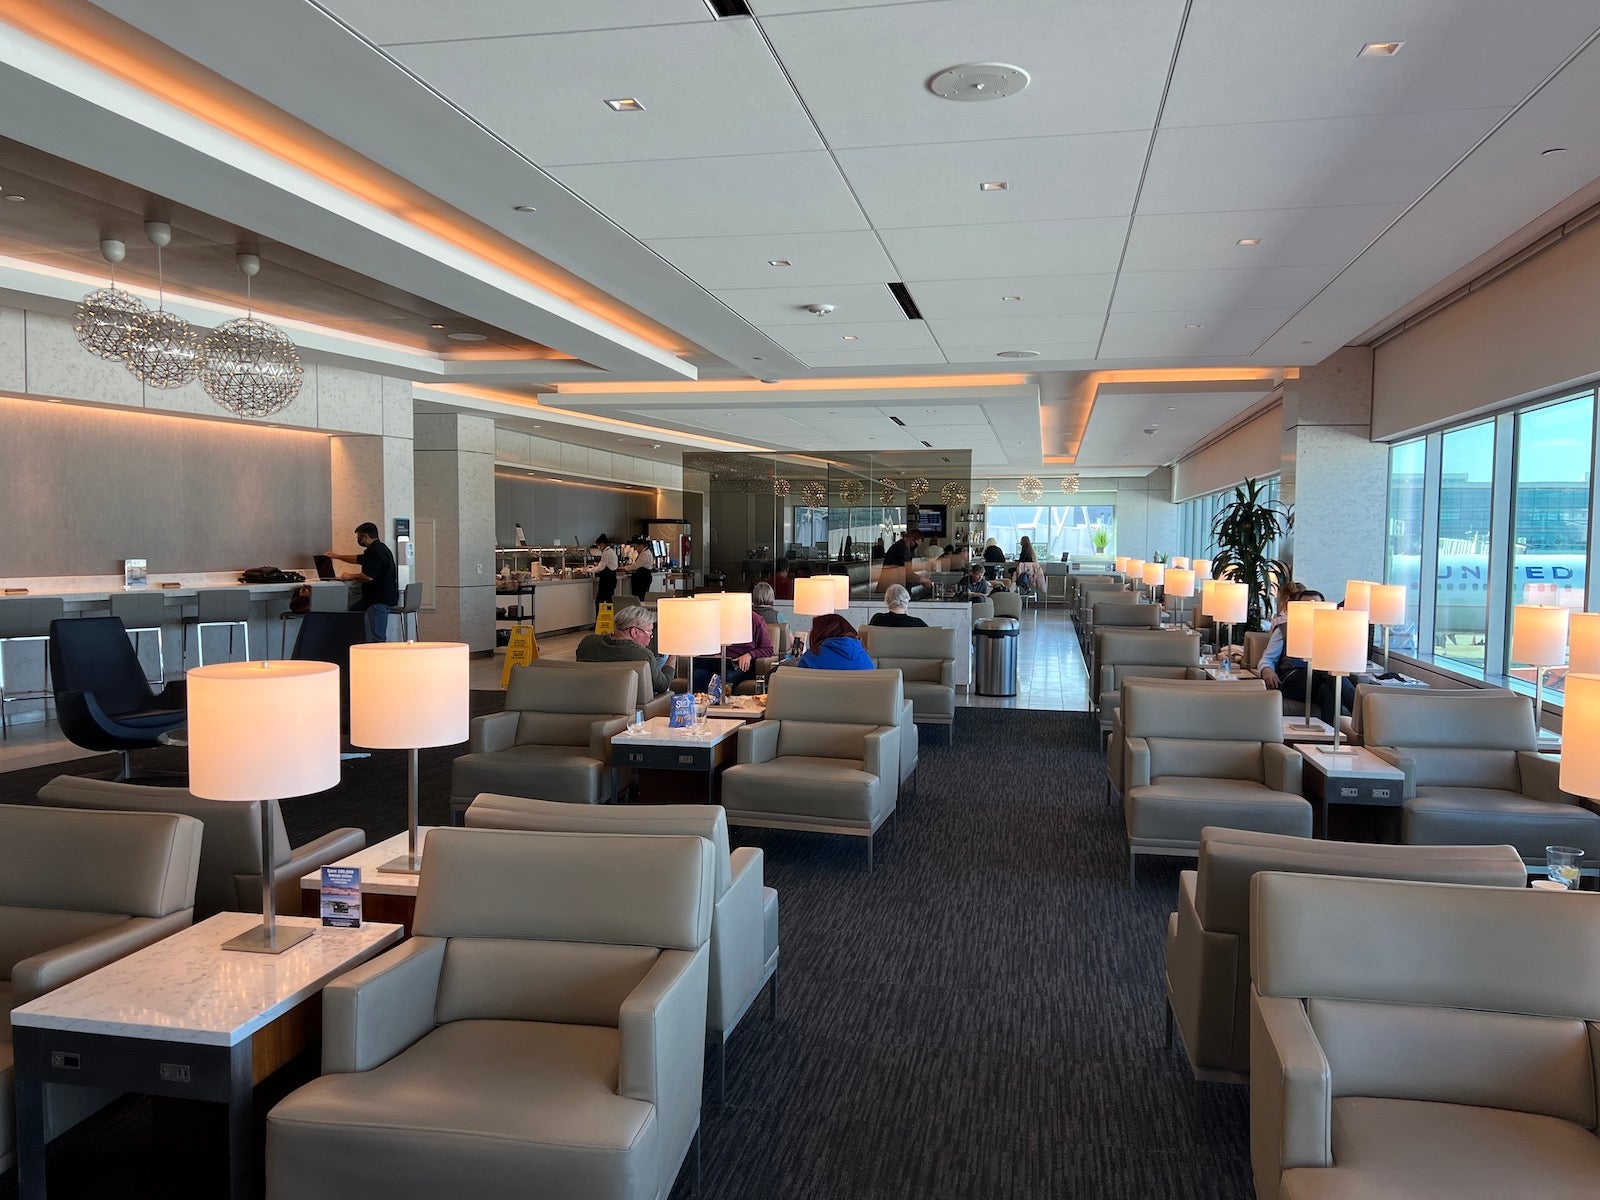 An airline club lounge pictured.